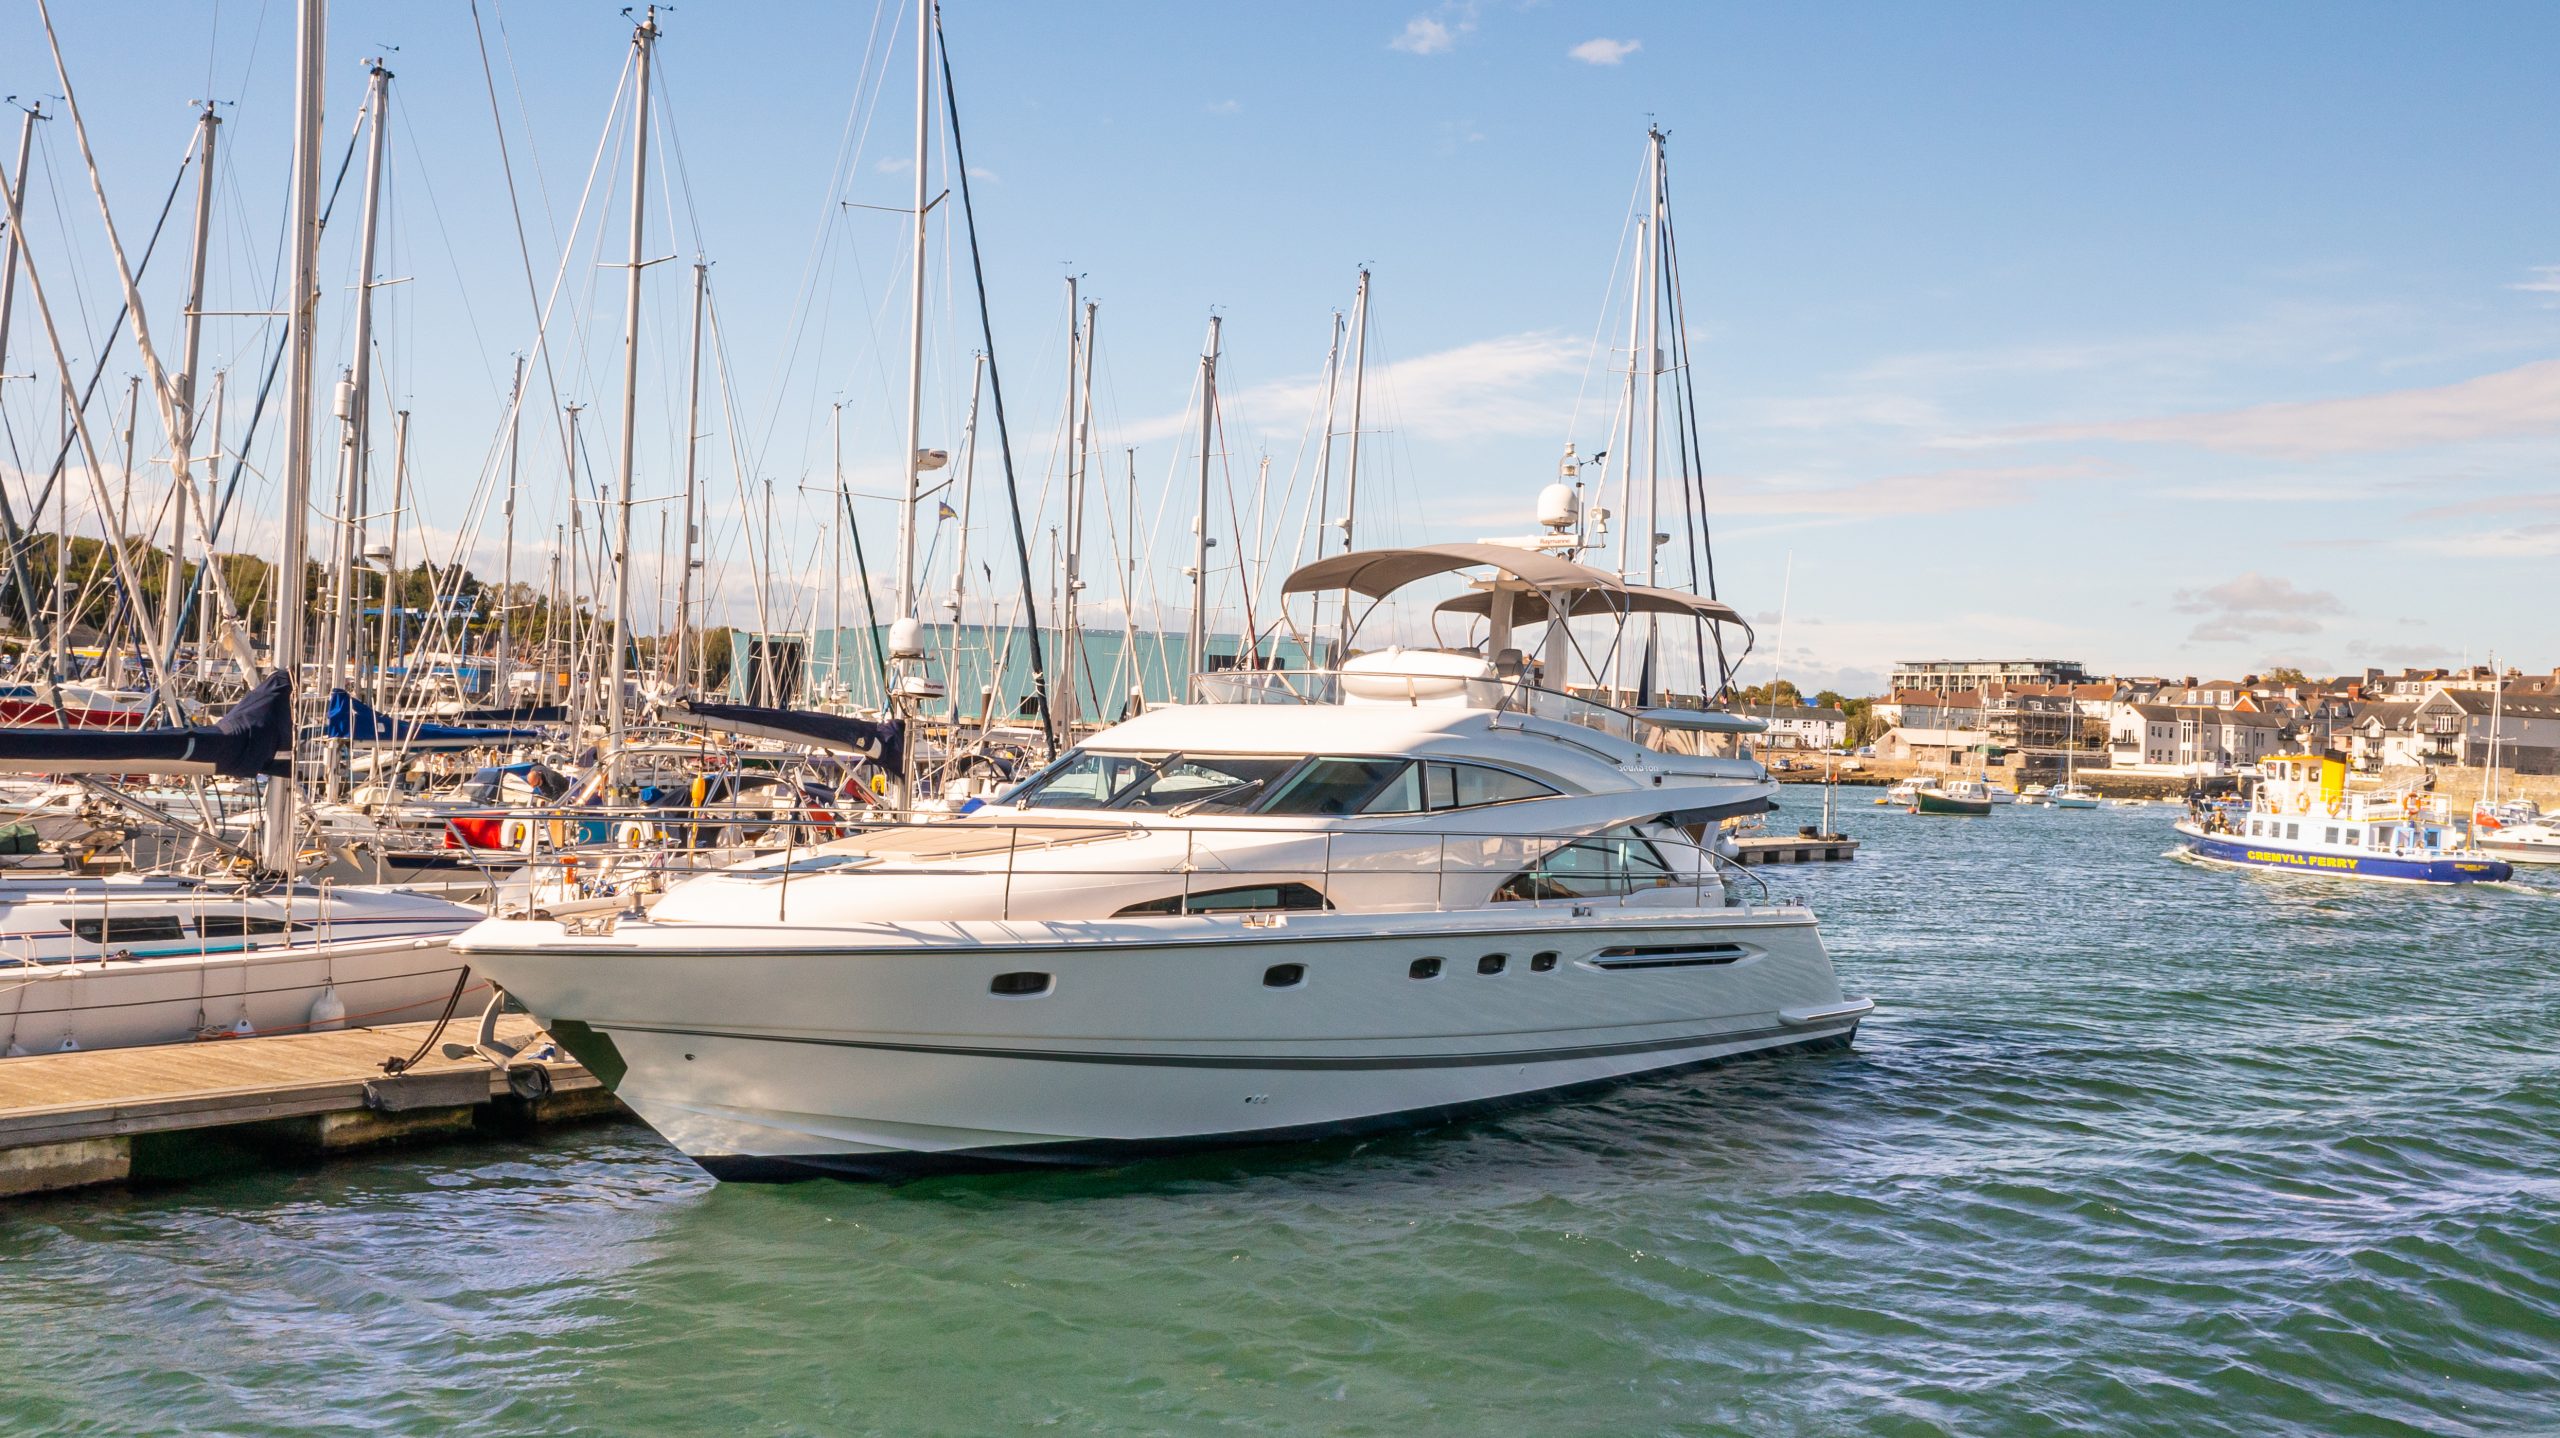 Setag Yachts: The ultimate makeover for pre-owned yachts